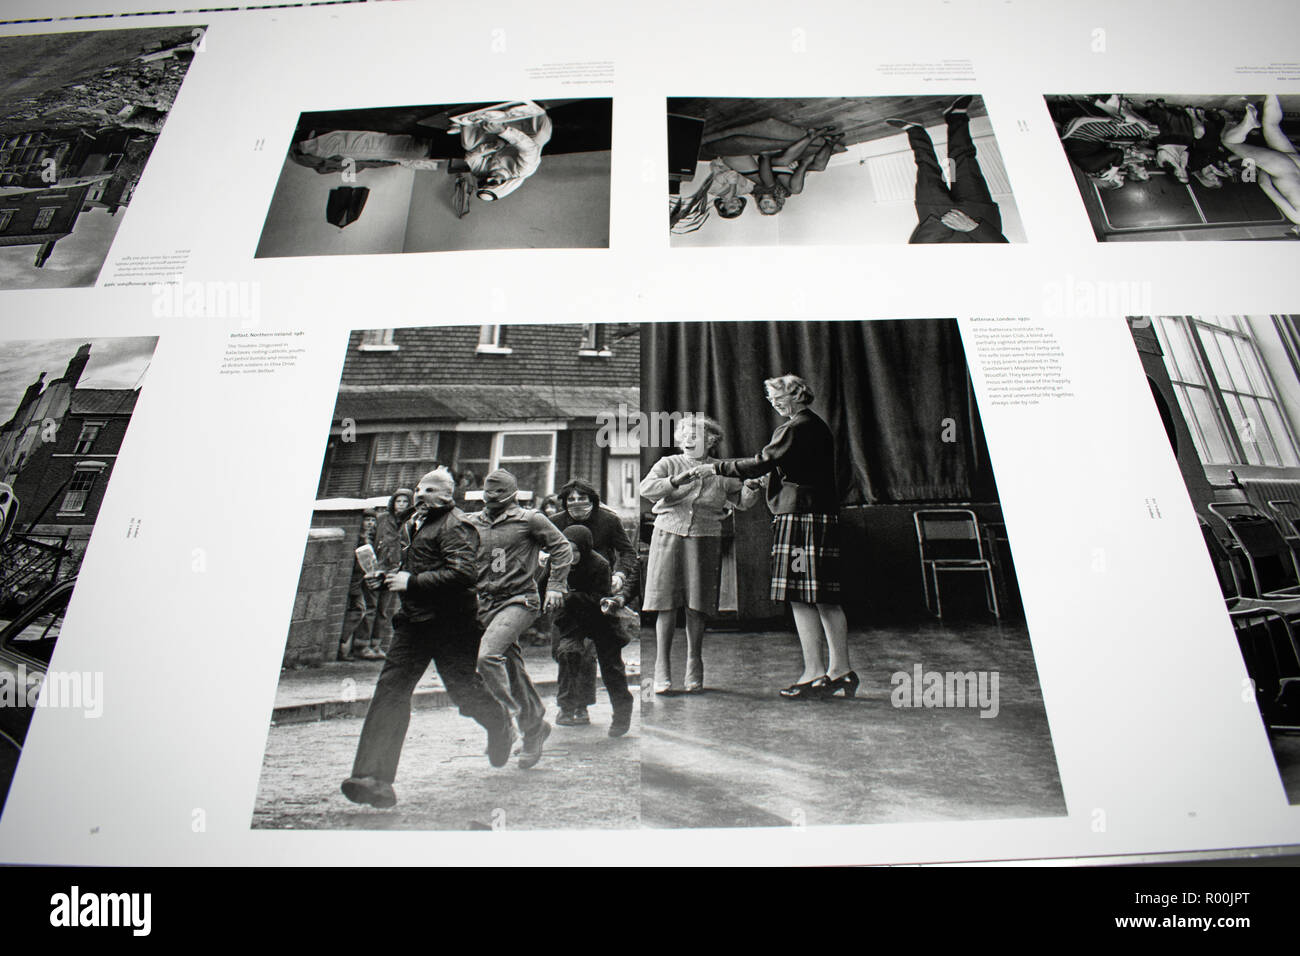 Photography book publishing, page proofs just off the press of My British Archive, The Way We Were 1968-1983 published by Dewi Lewis Publishing at EBS Verona Italy. 2018 HOMER SYKES Stock Photo